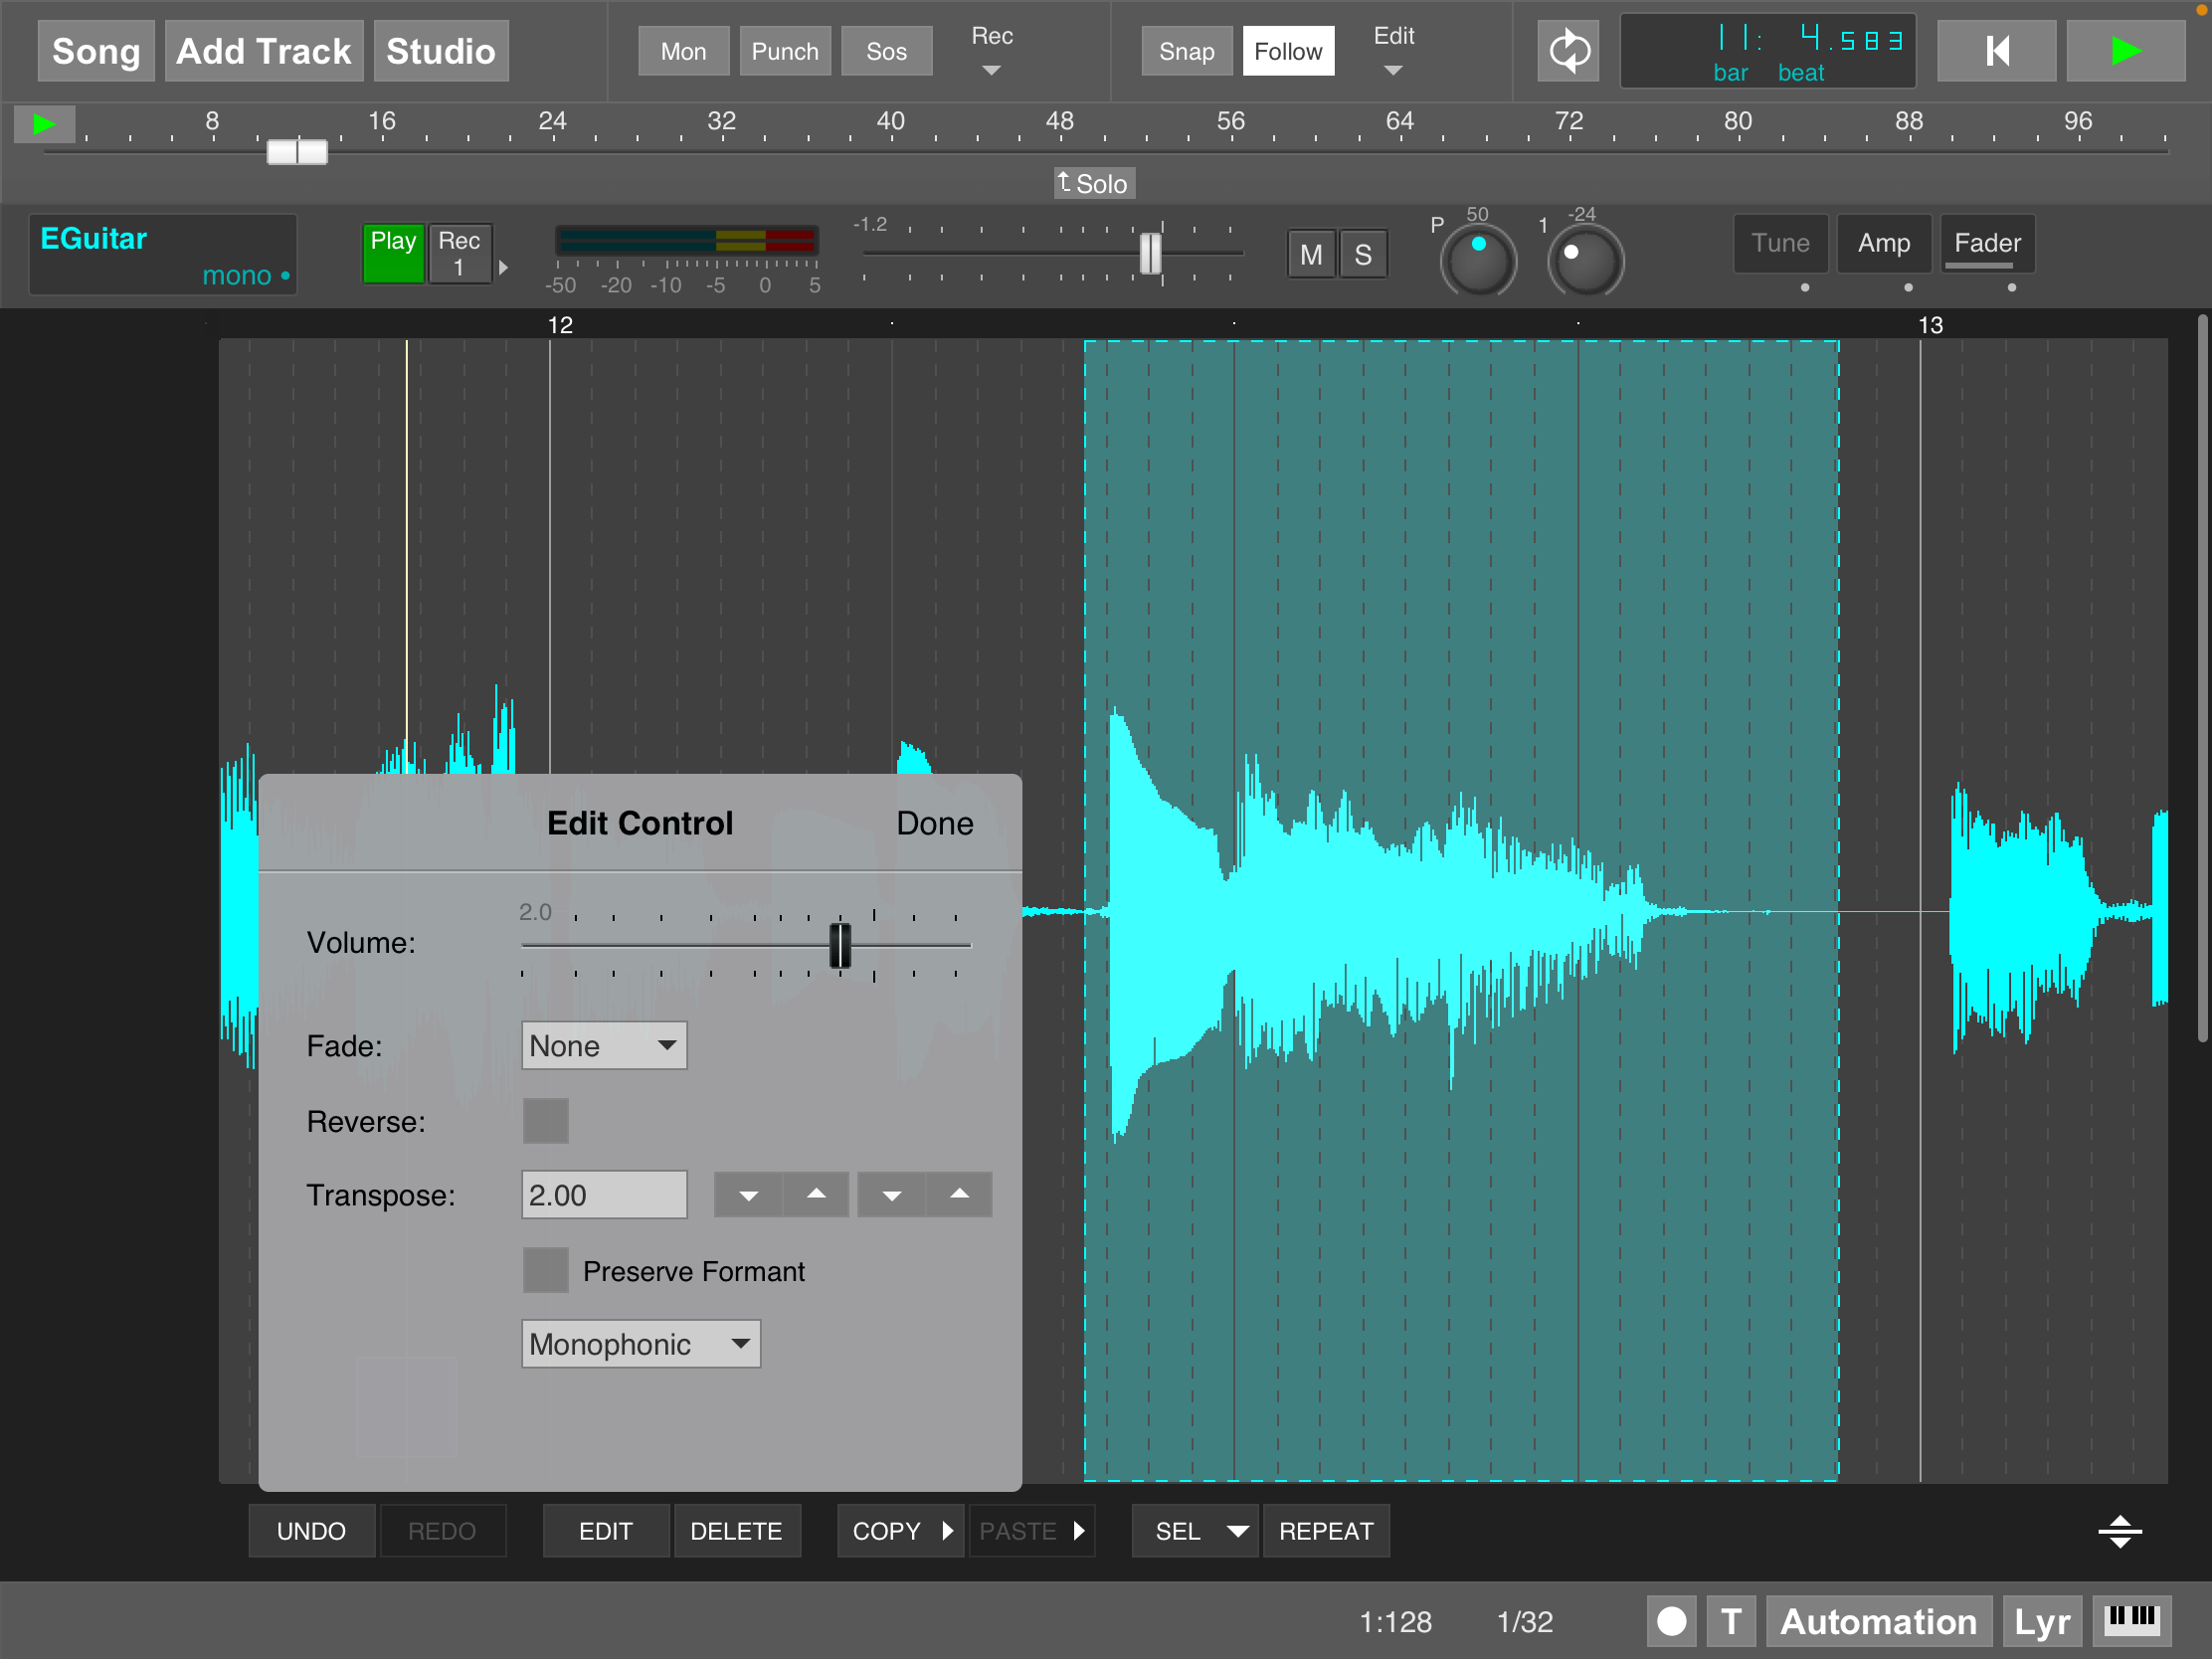 Audio pitch shifting in track editor